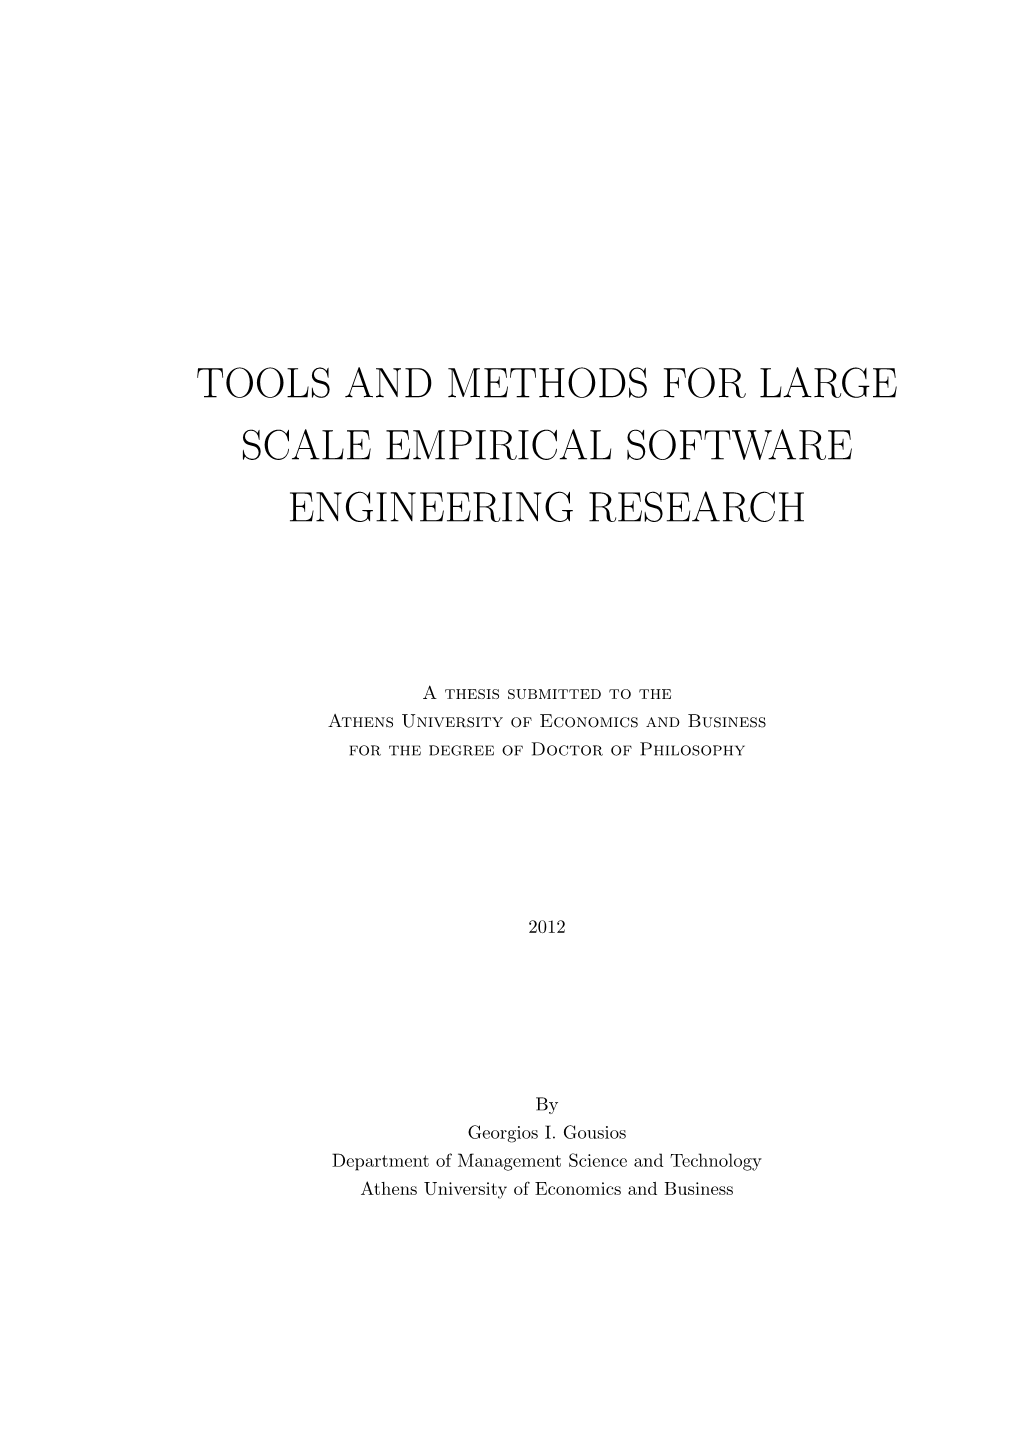 Tools and Methods for Large Scale Empirical Software Engineering Research